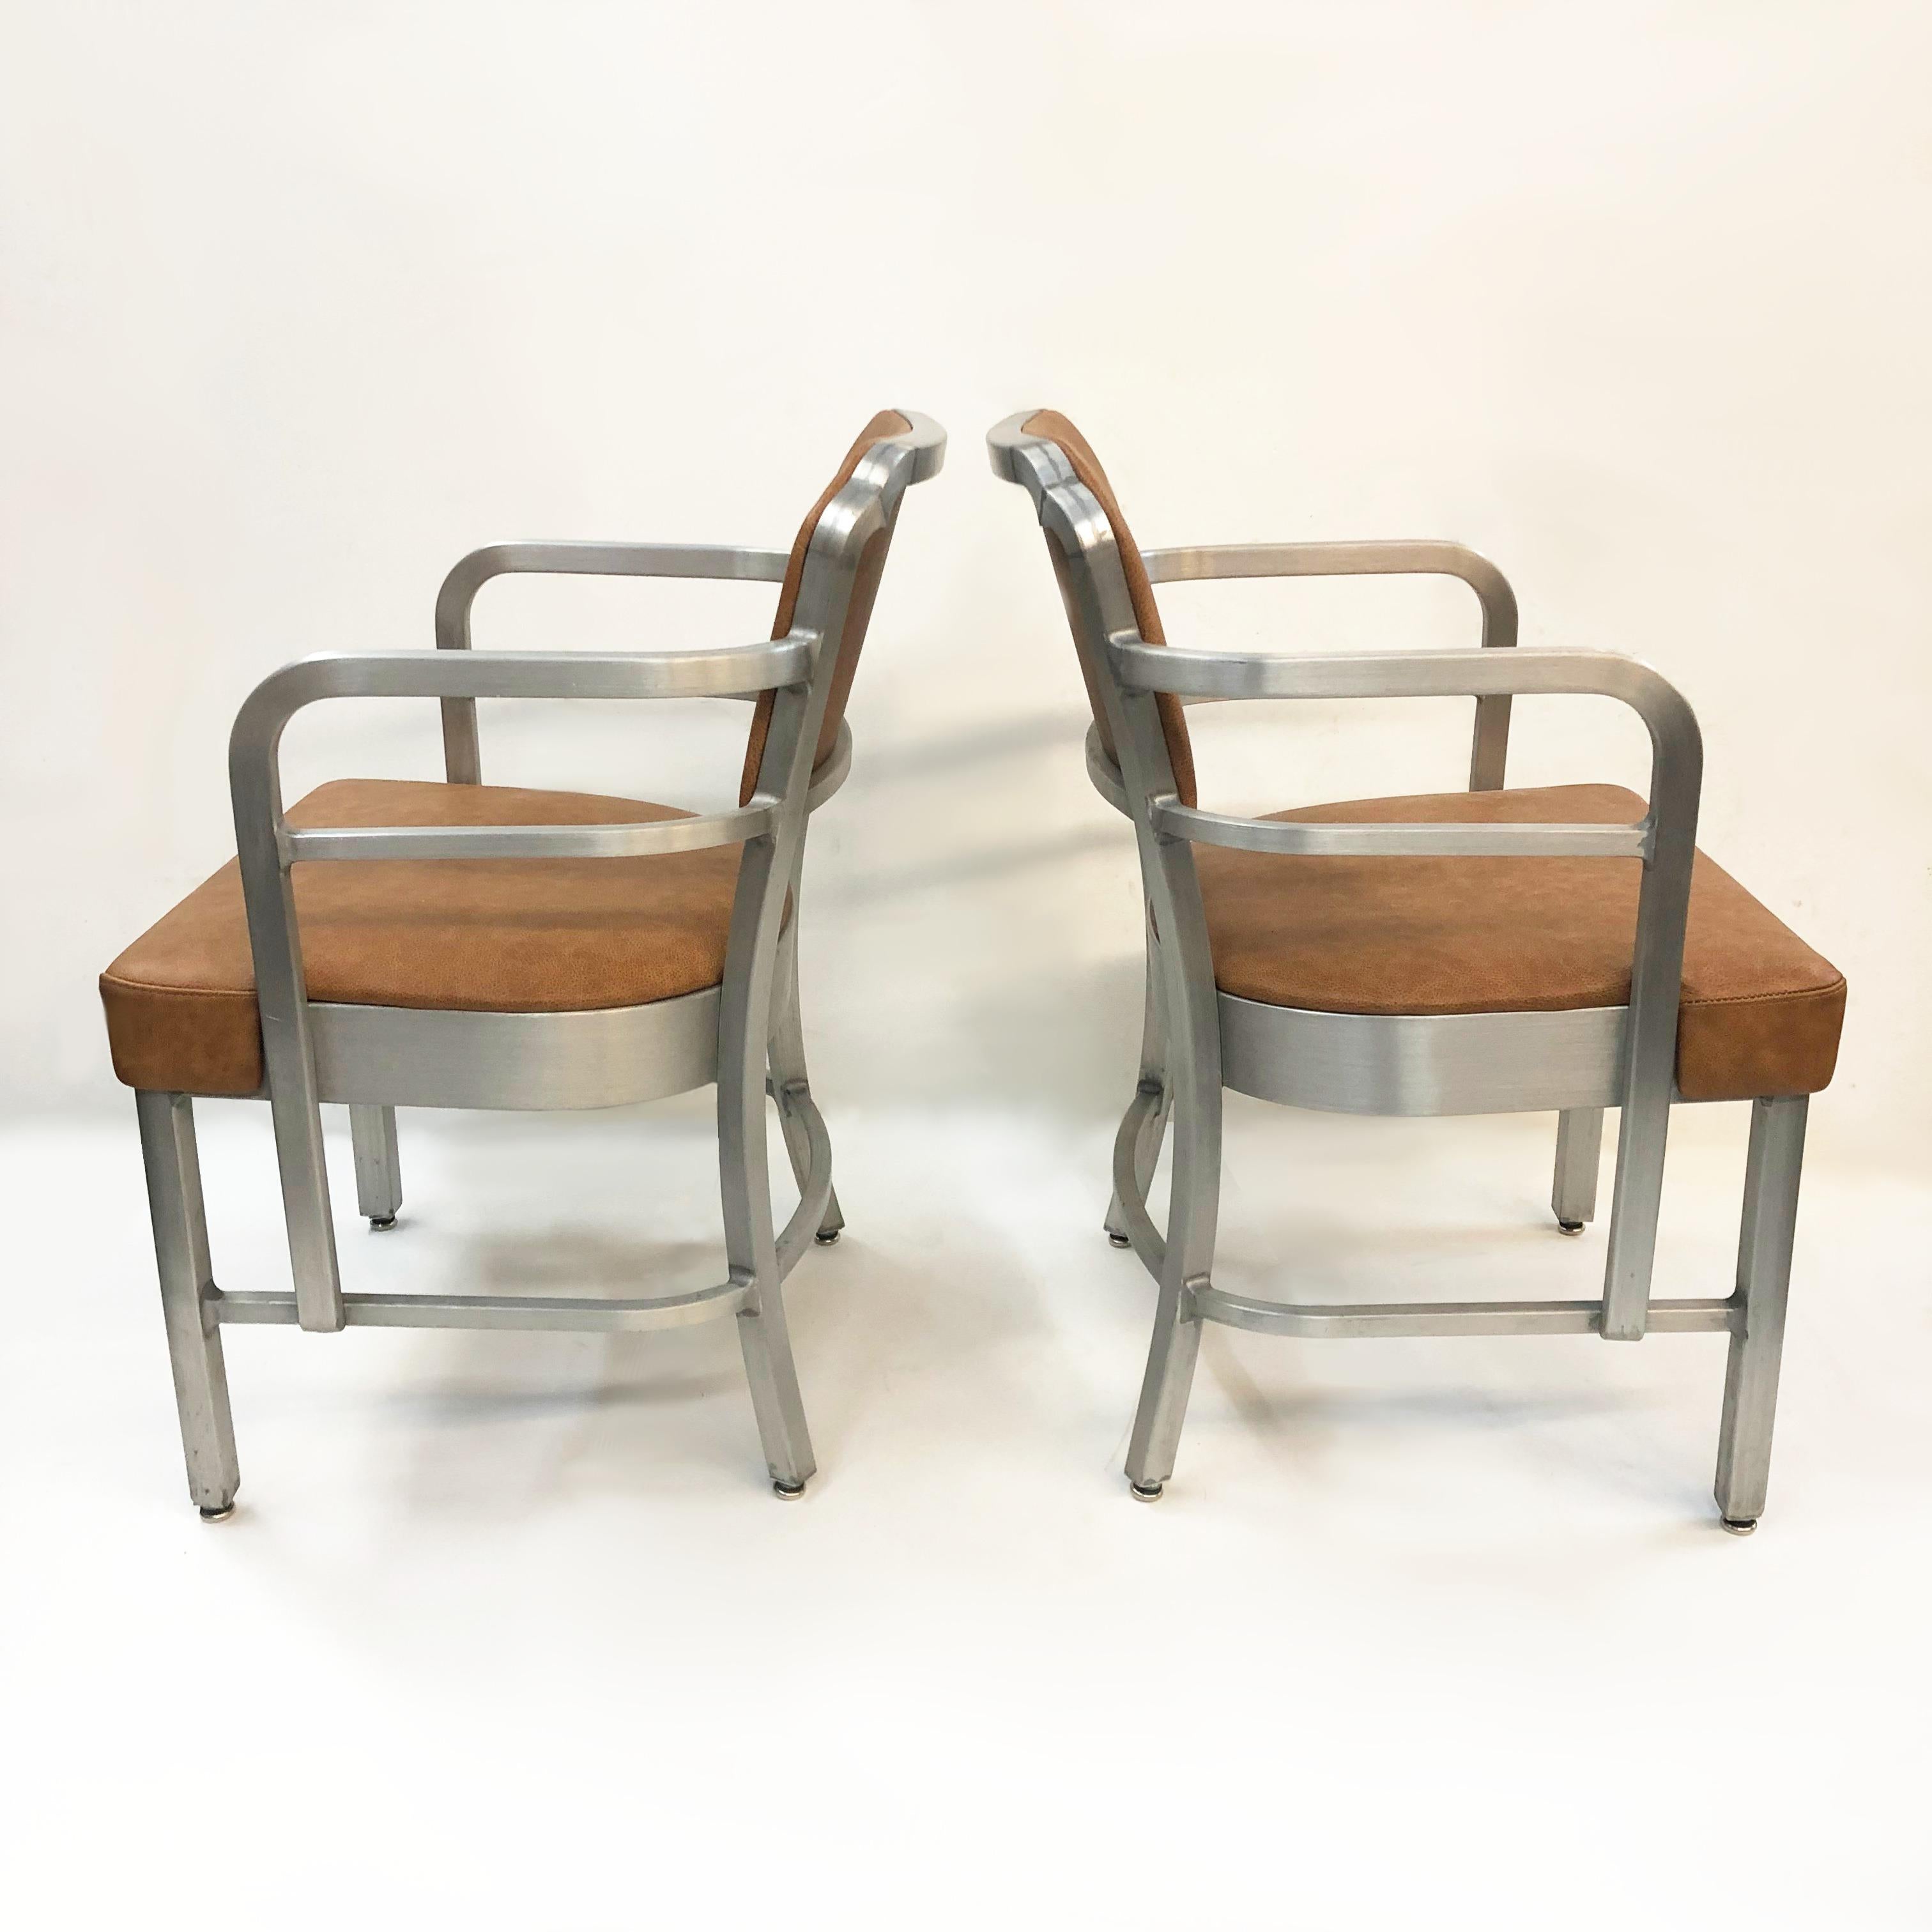 American Rare Pair of Art Deco Industrial Aluminum & Leather Club Arm Chairs by GoodForm For Sale